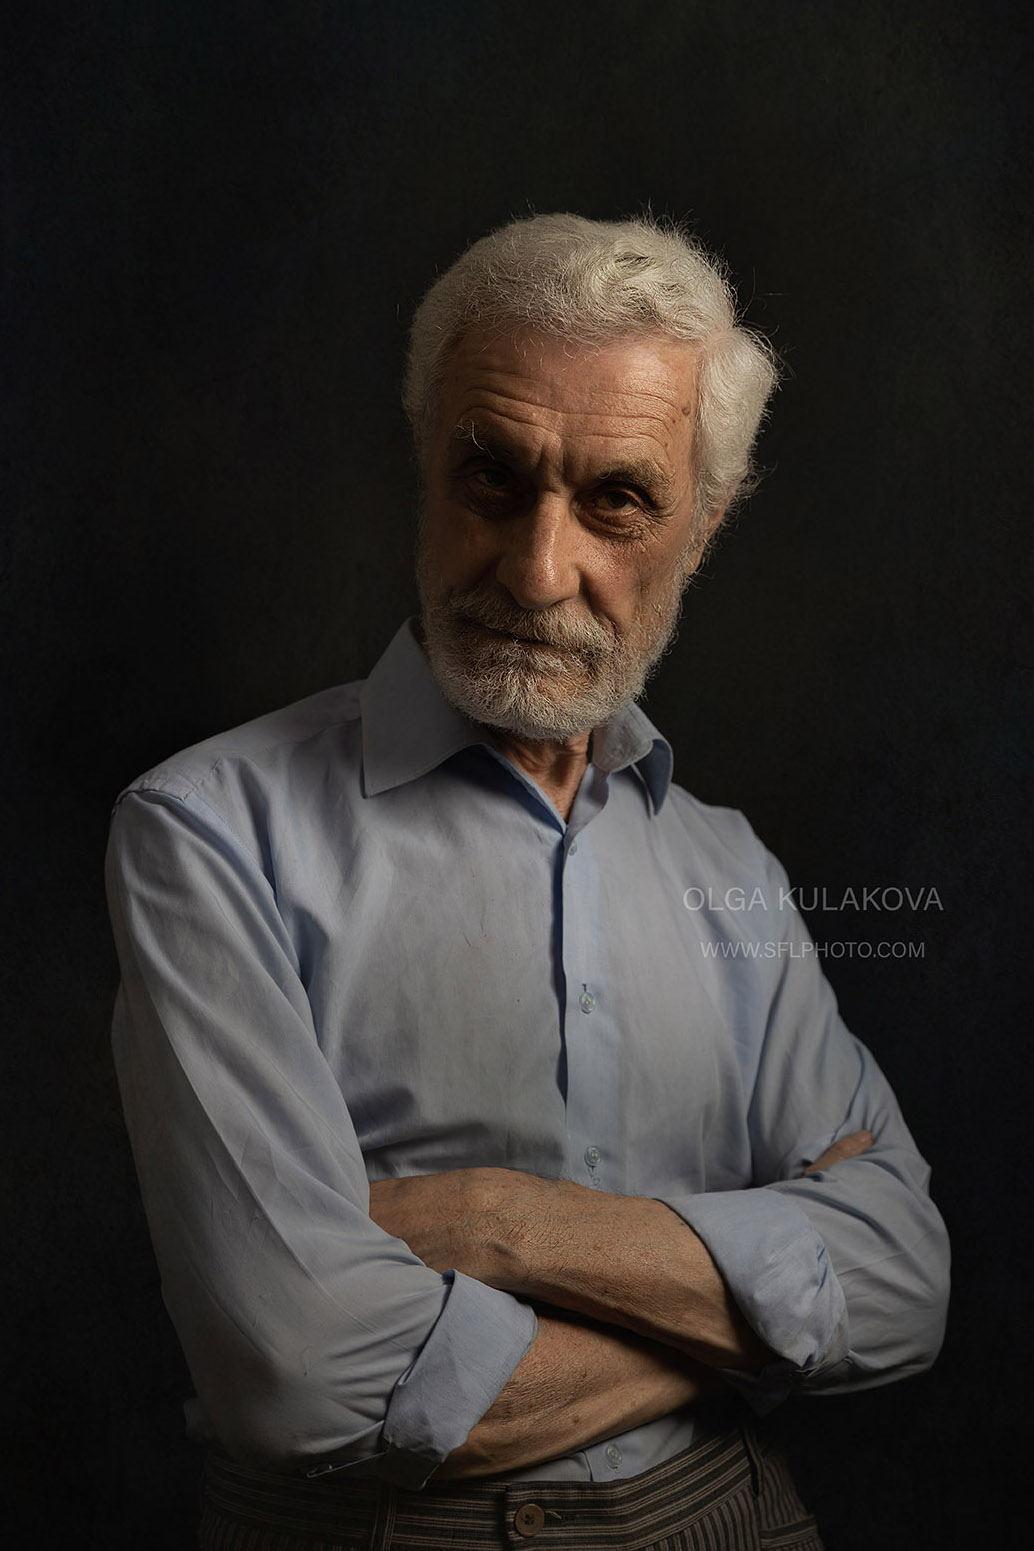 Old man portrait with one flash light